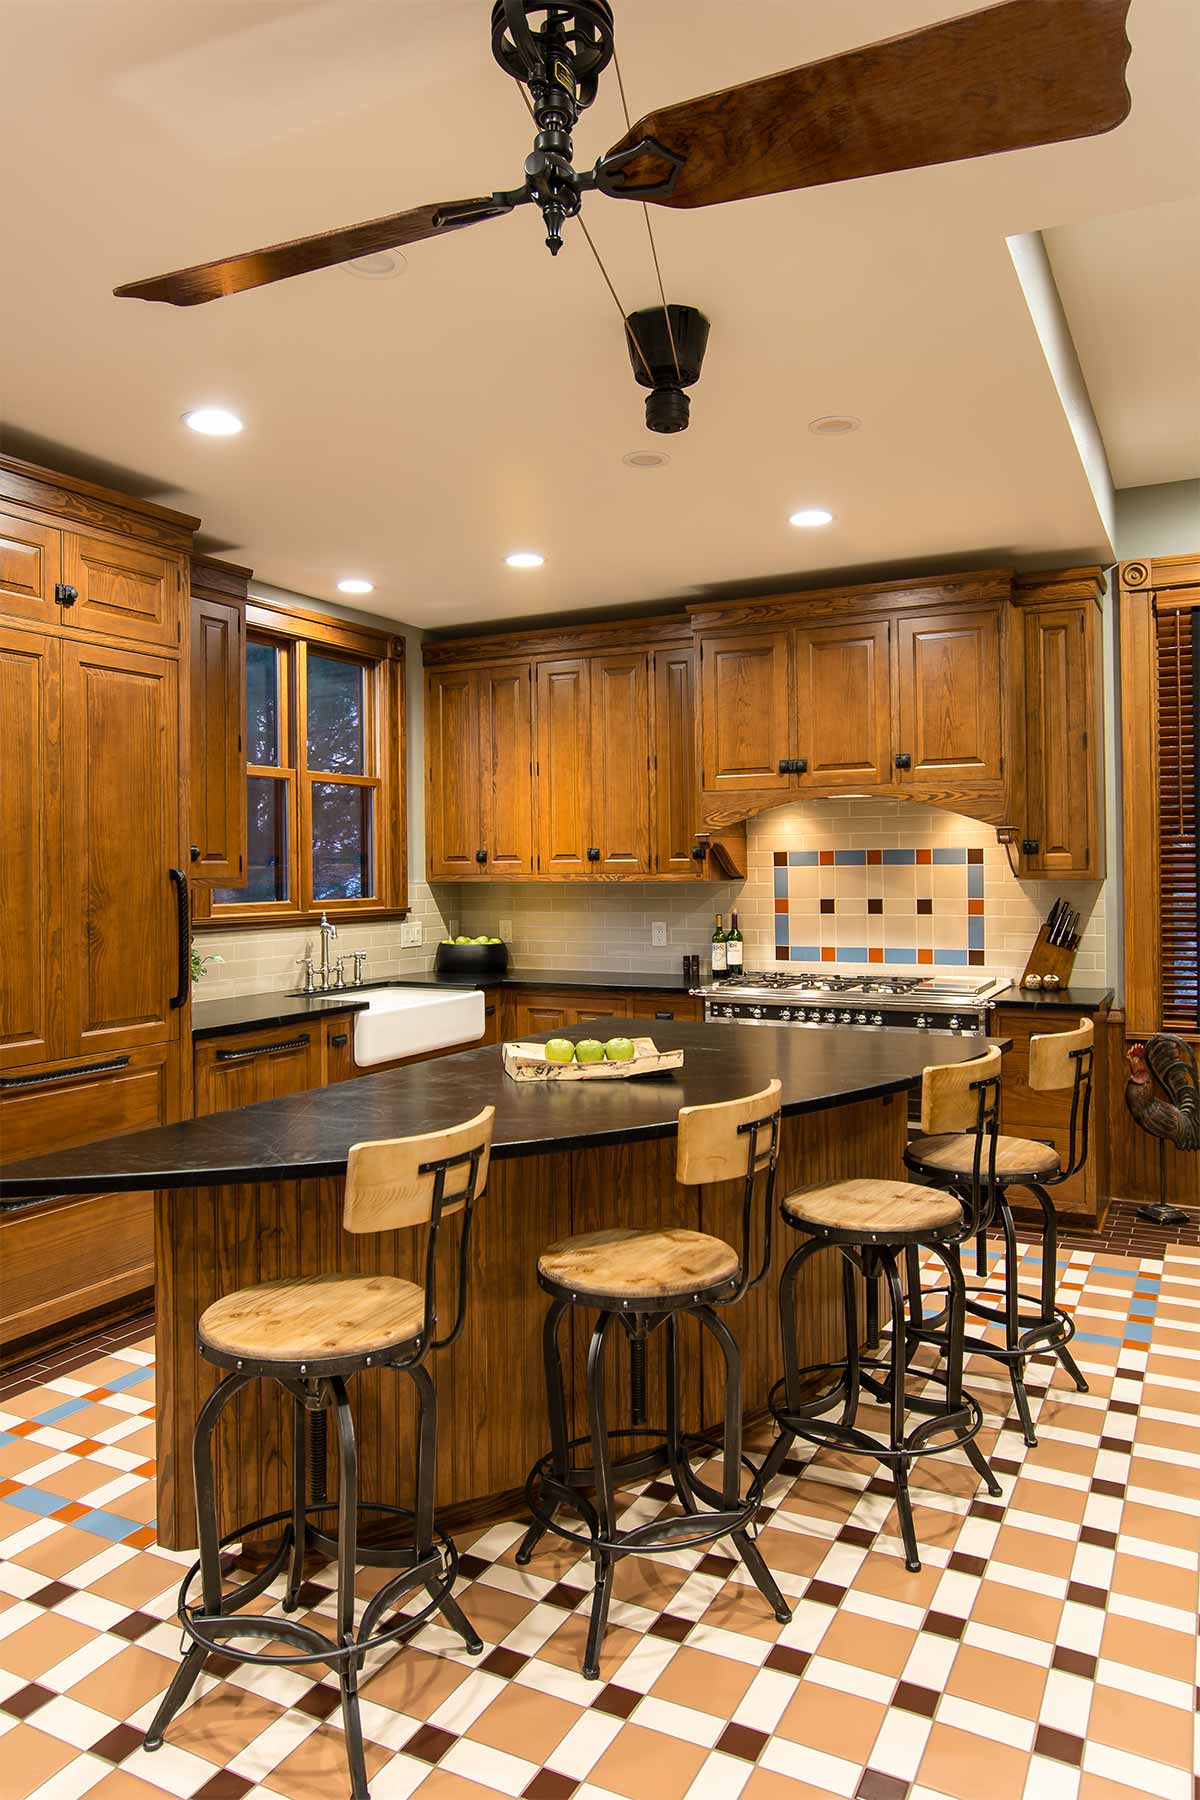 historical kitchen remodel by Silent Rivers in Des Moines Victorian home features custom victorian kitchen cabinets concealing refrigerator and dishwasher and belt-driven fan